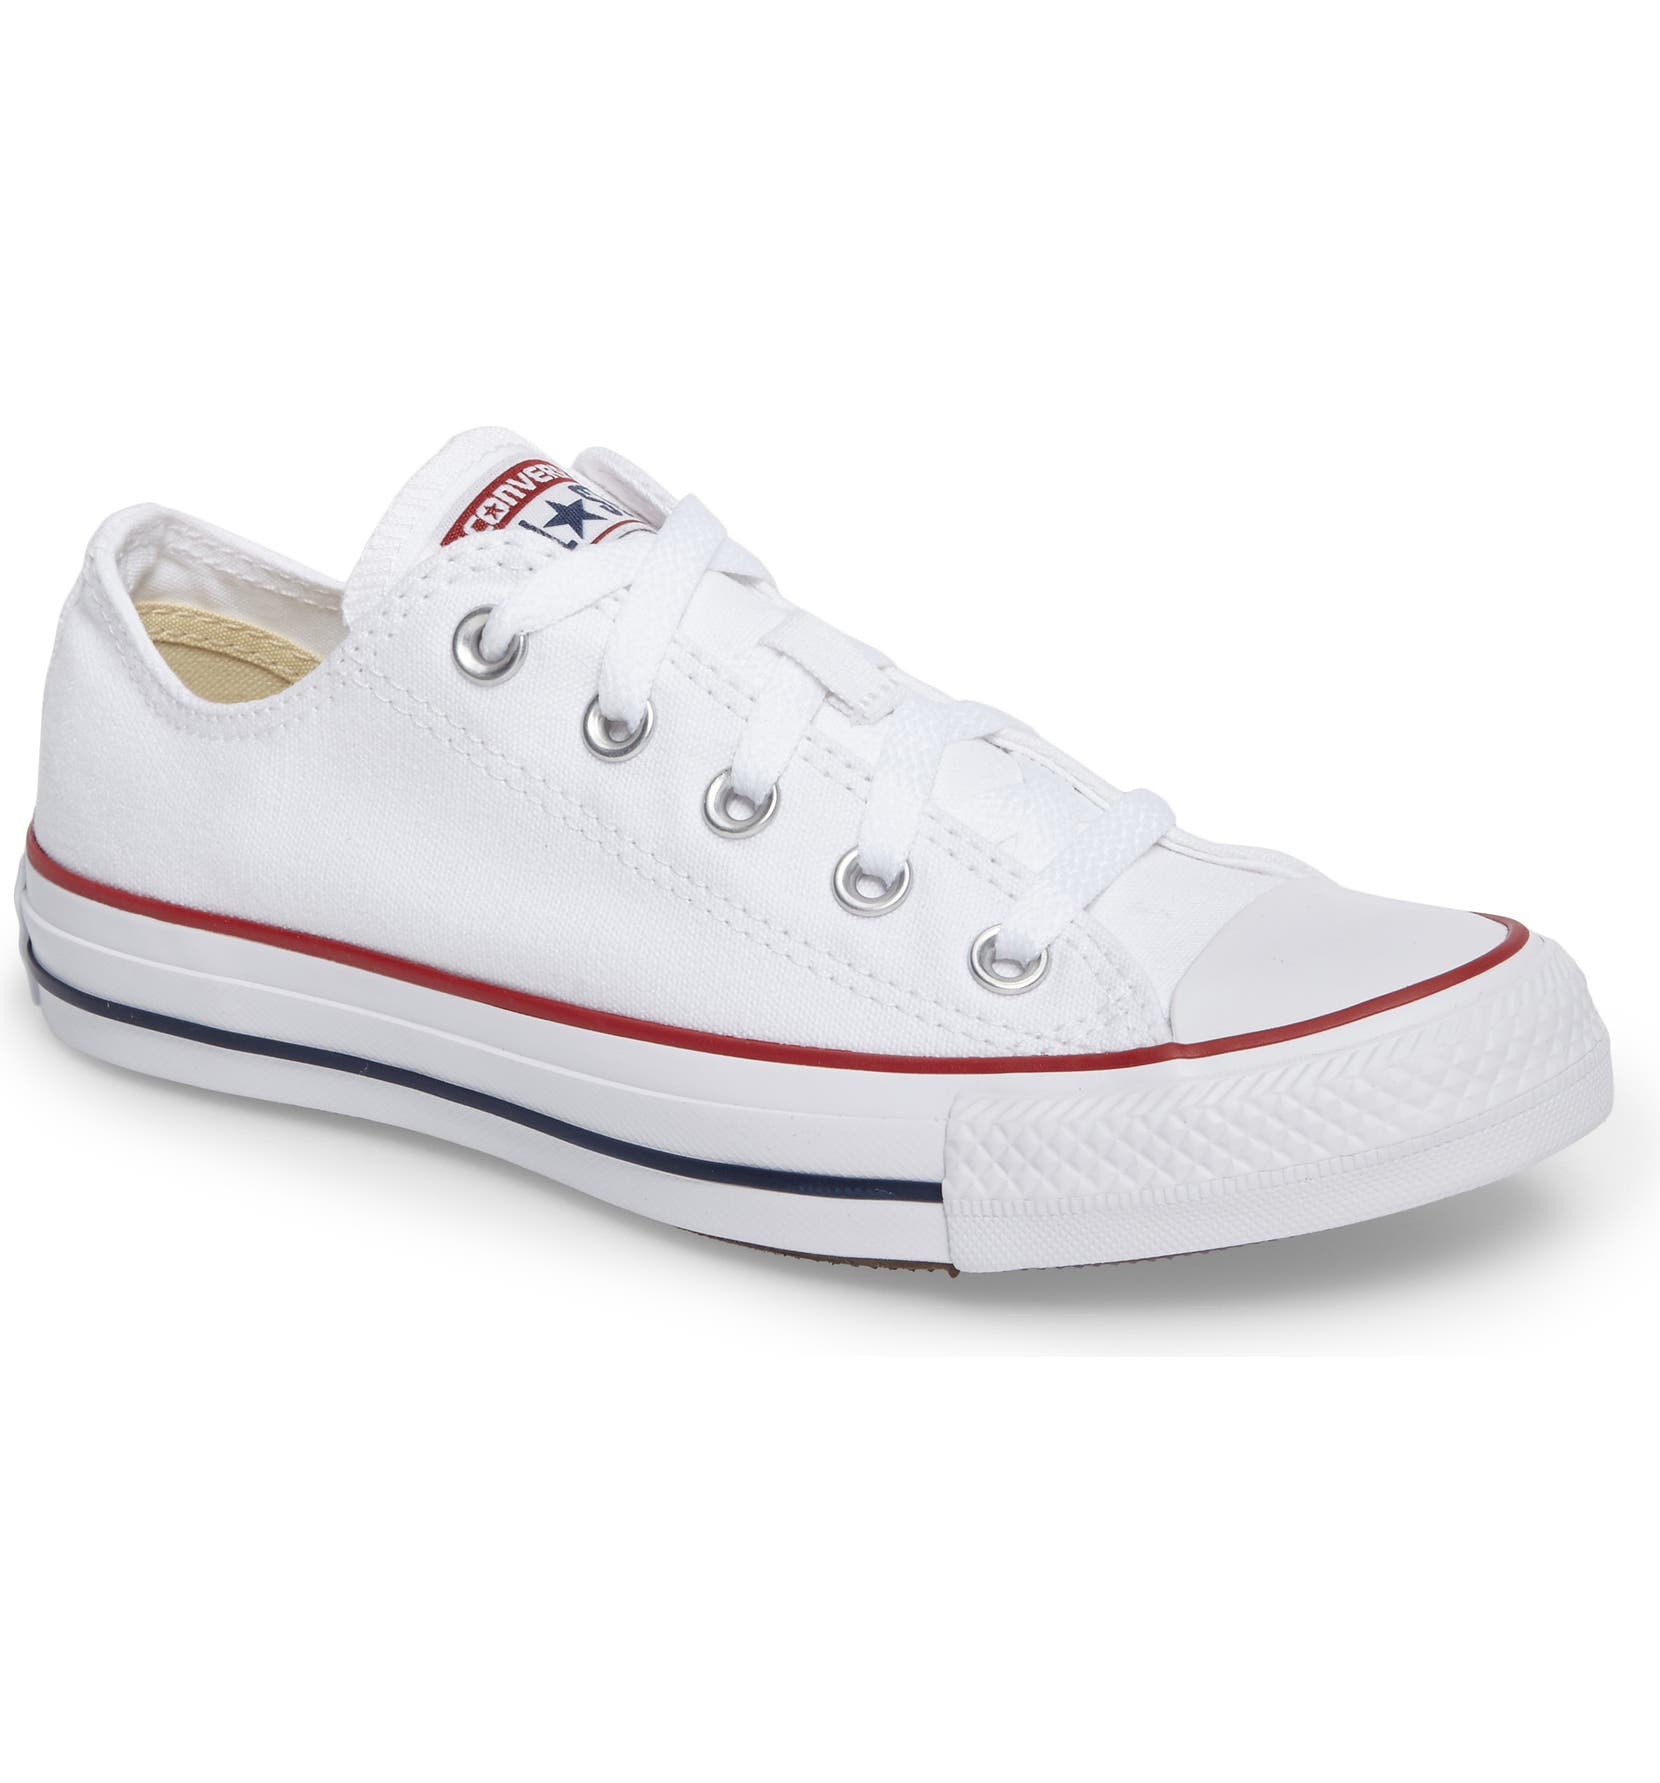 CONVERSE Chuck Taylor<sup>®</sup> Low Top Sneaker, Main, color, OPTIC WHITE